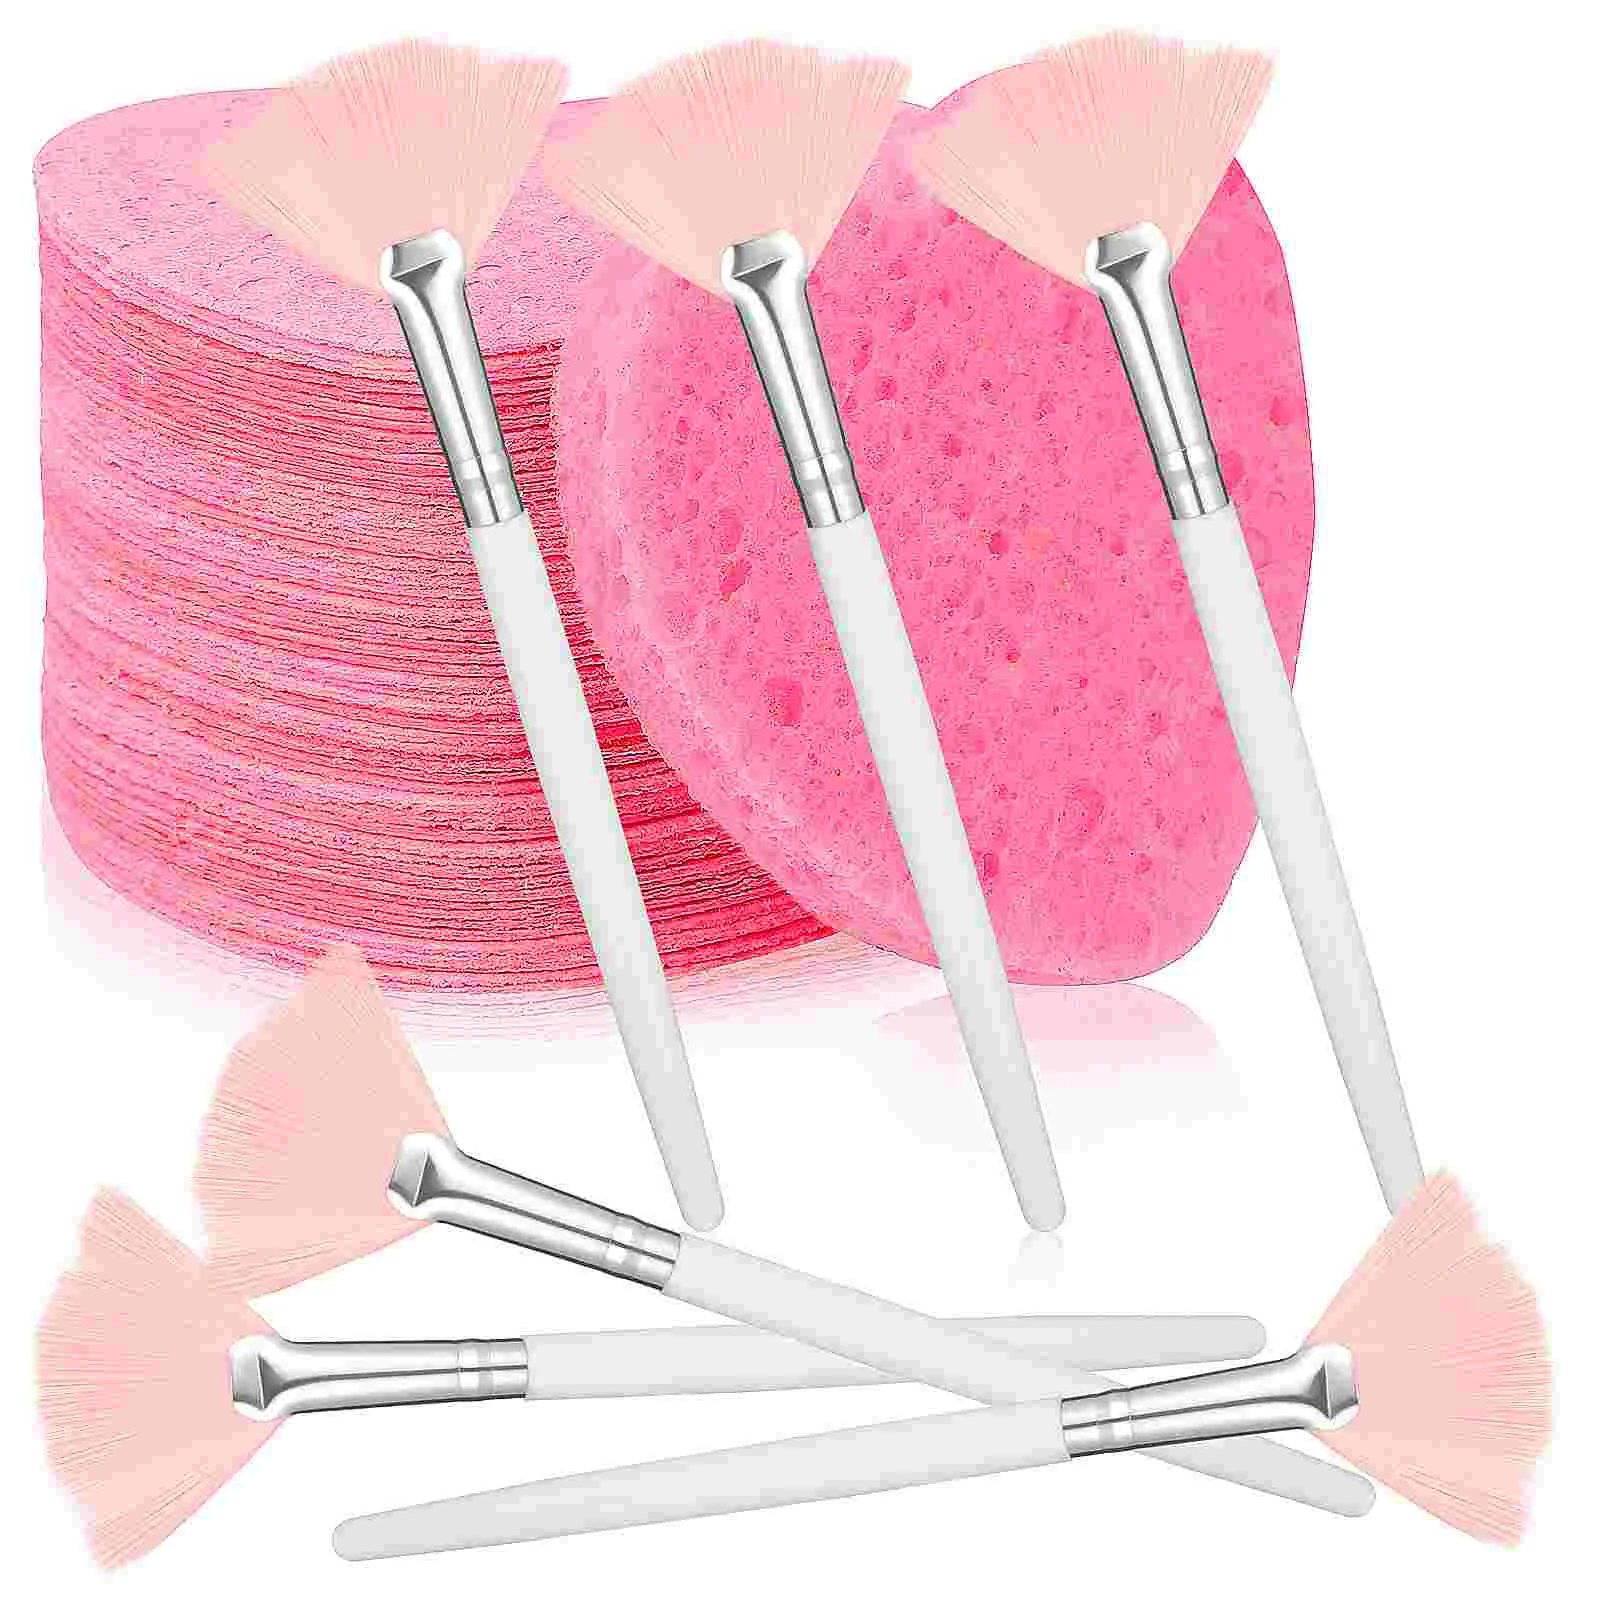 

60 Pcs Compressed Facial Sponges Face Cleansing Sponges Wash Face Sponges and 6 Pcs Fan Brushes for Women and Girls